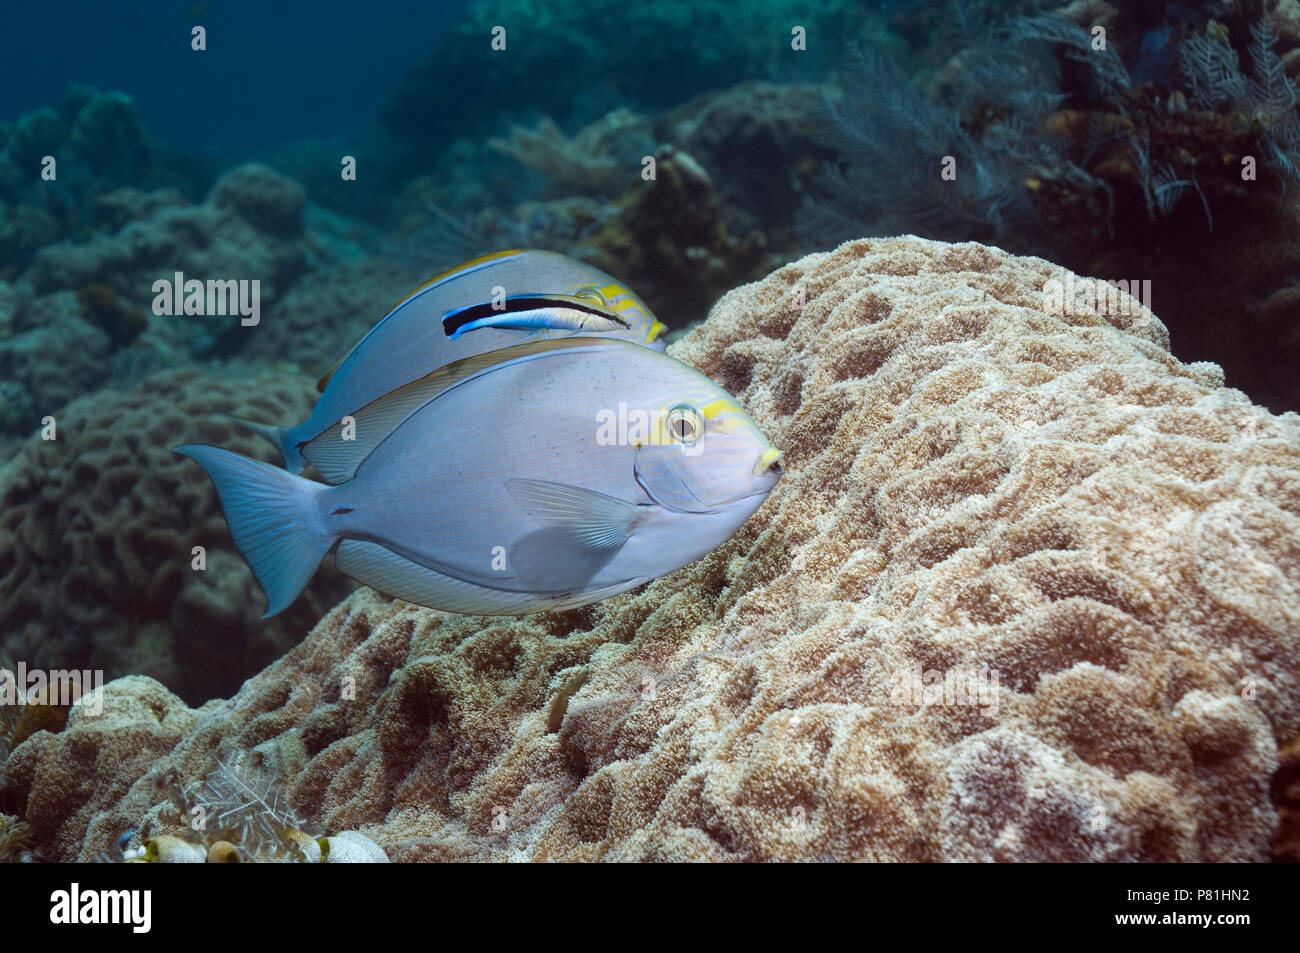 Elongate surgeonfish (Acanthurus mata) with a Cleaner wrasse (Labroides dimidiatus). Stock Photo